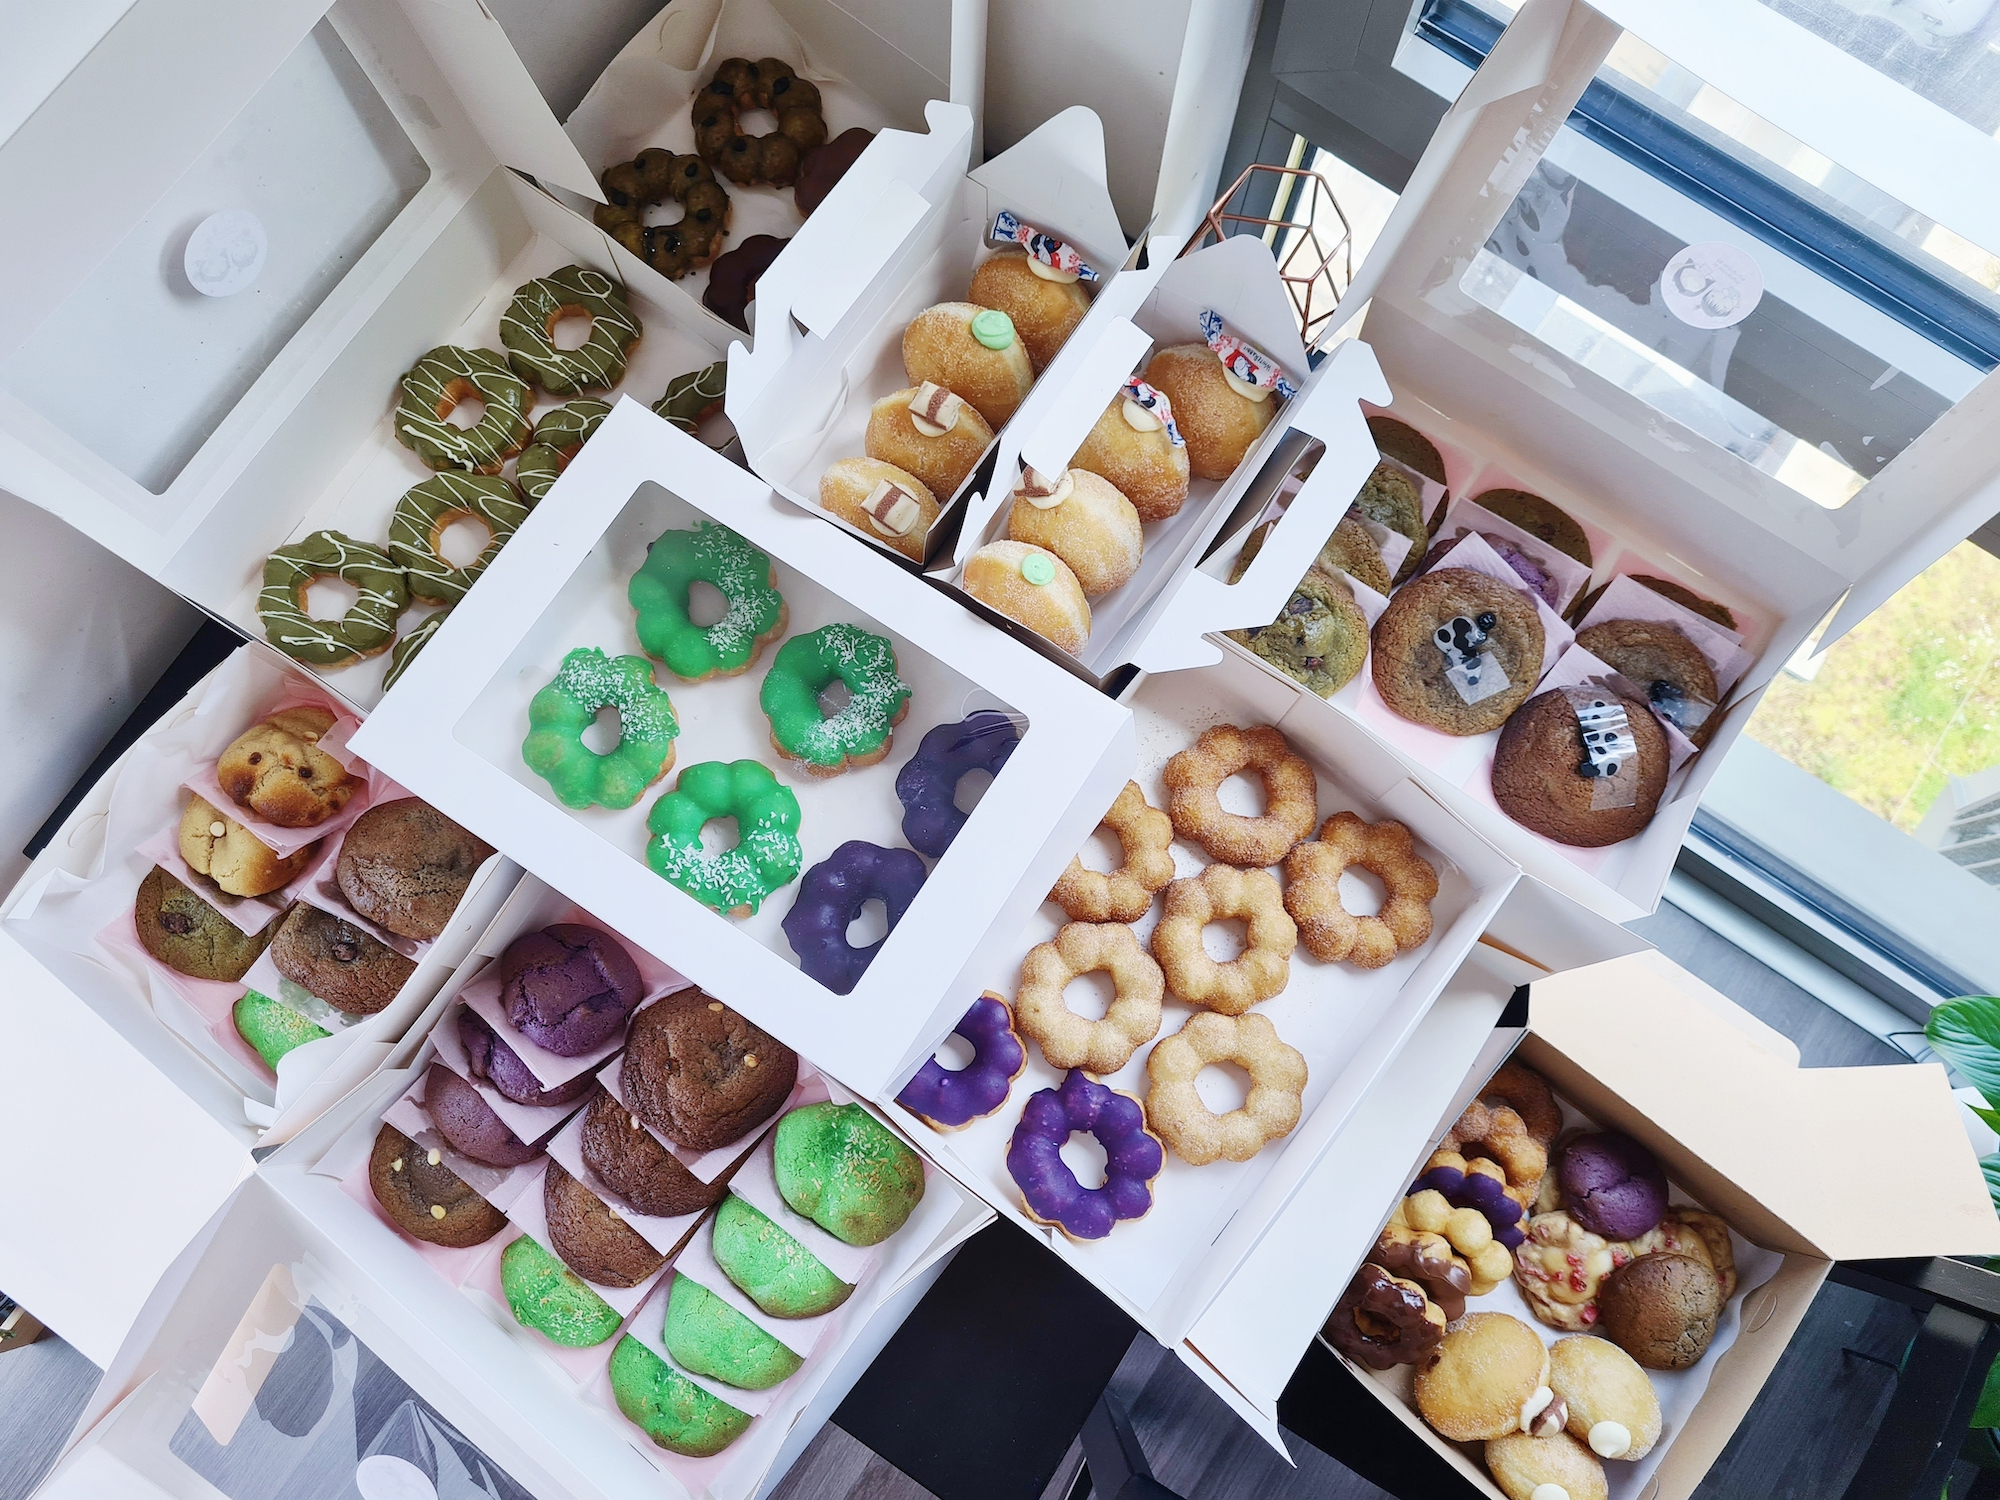 Many boxes of colourful donuts and baked goods